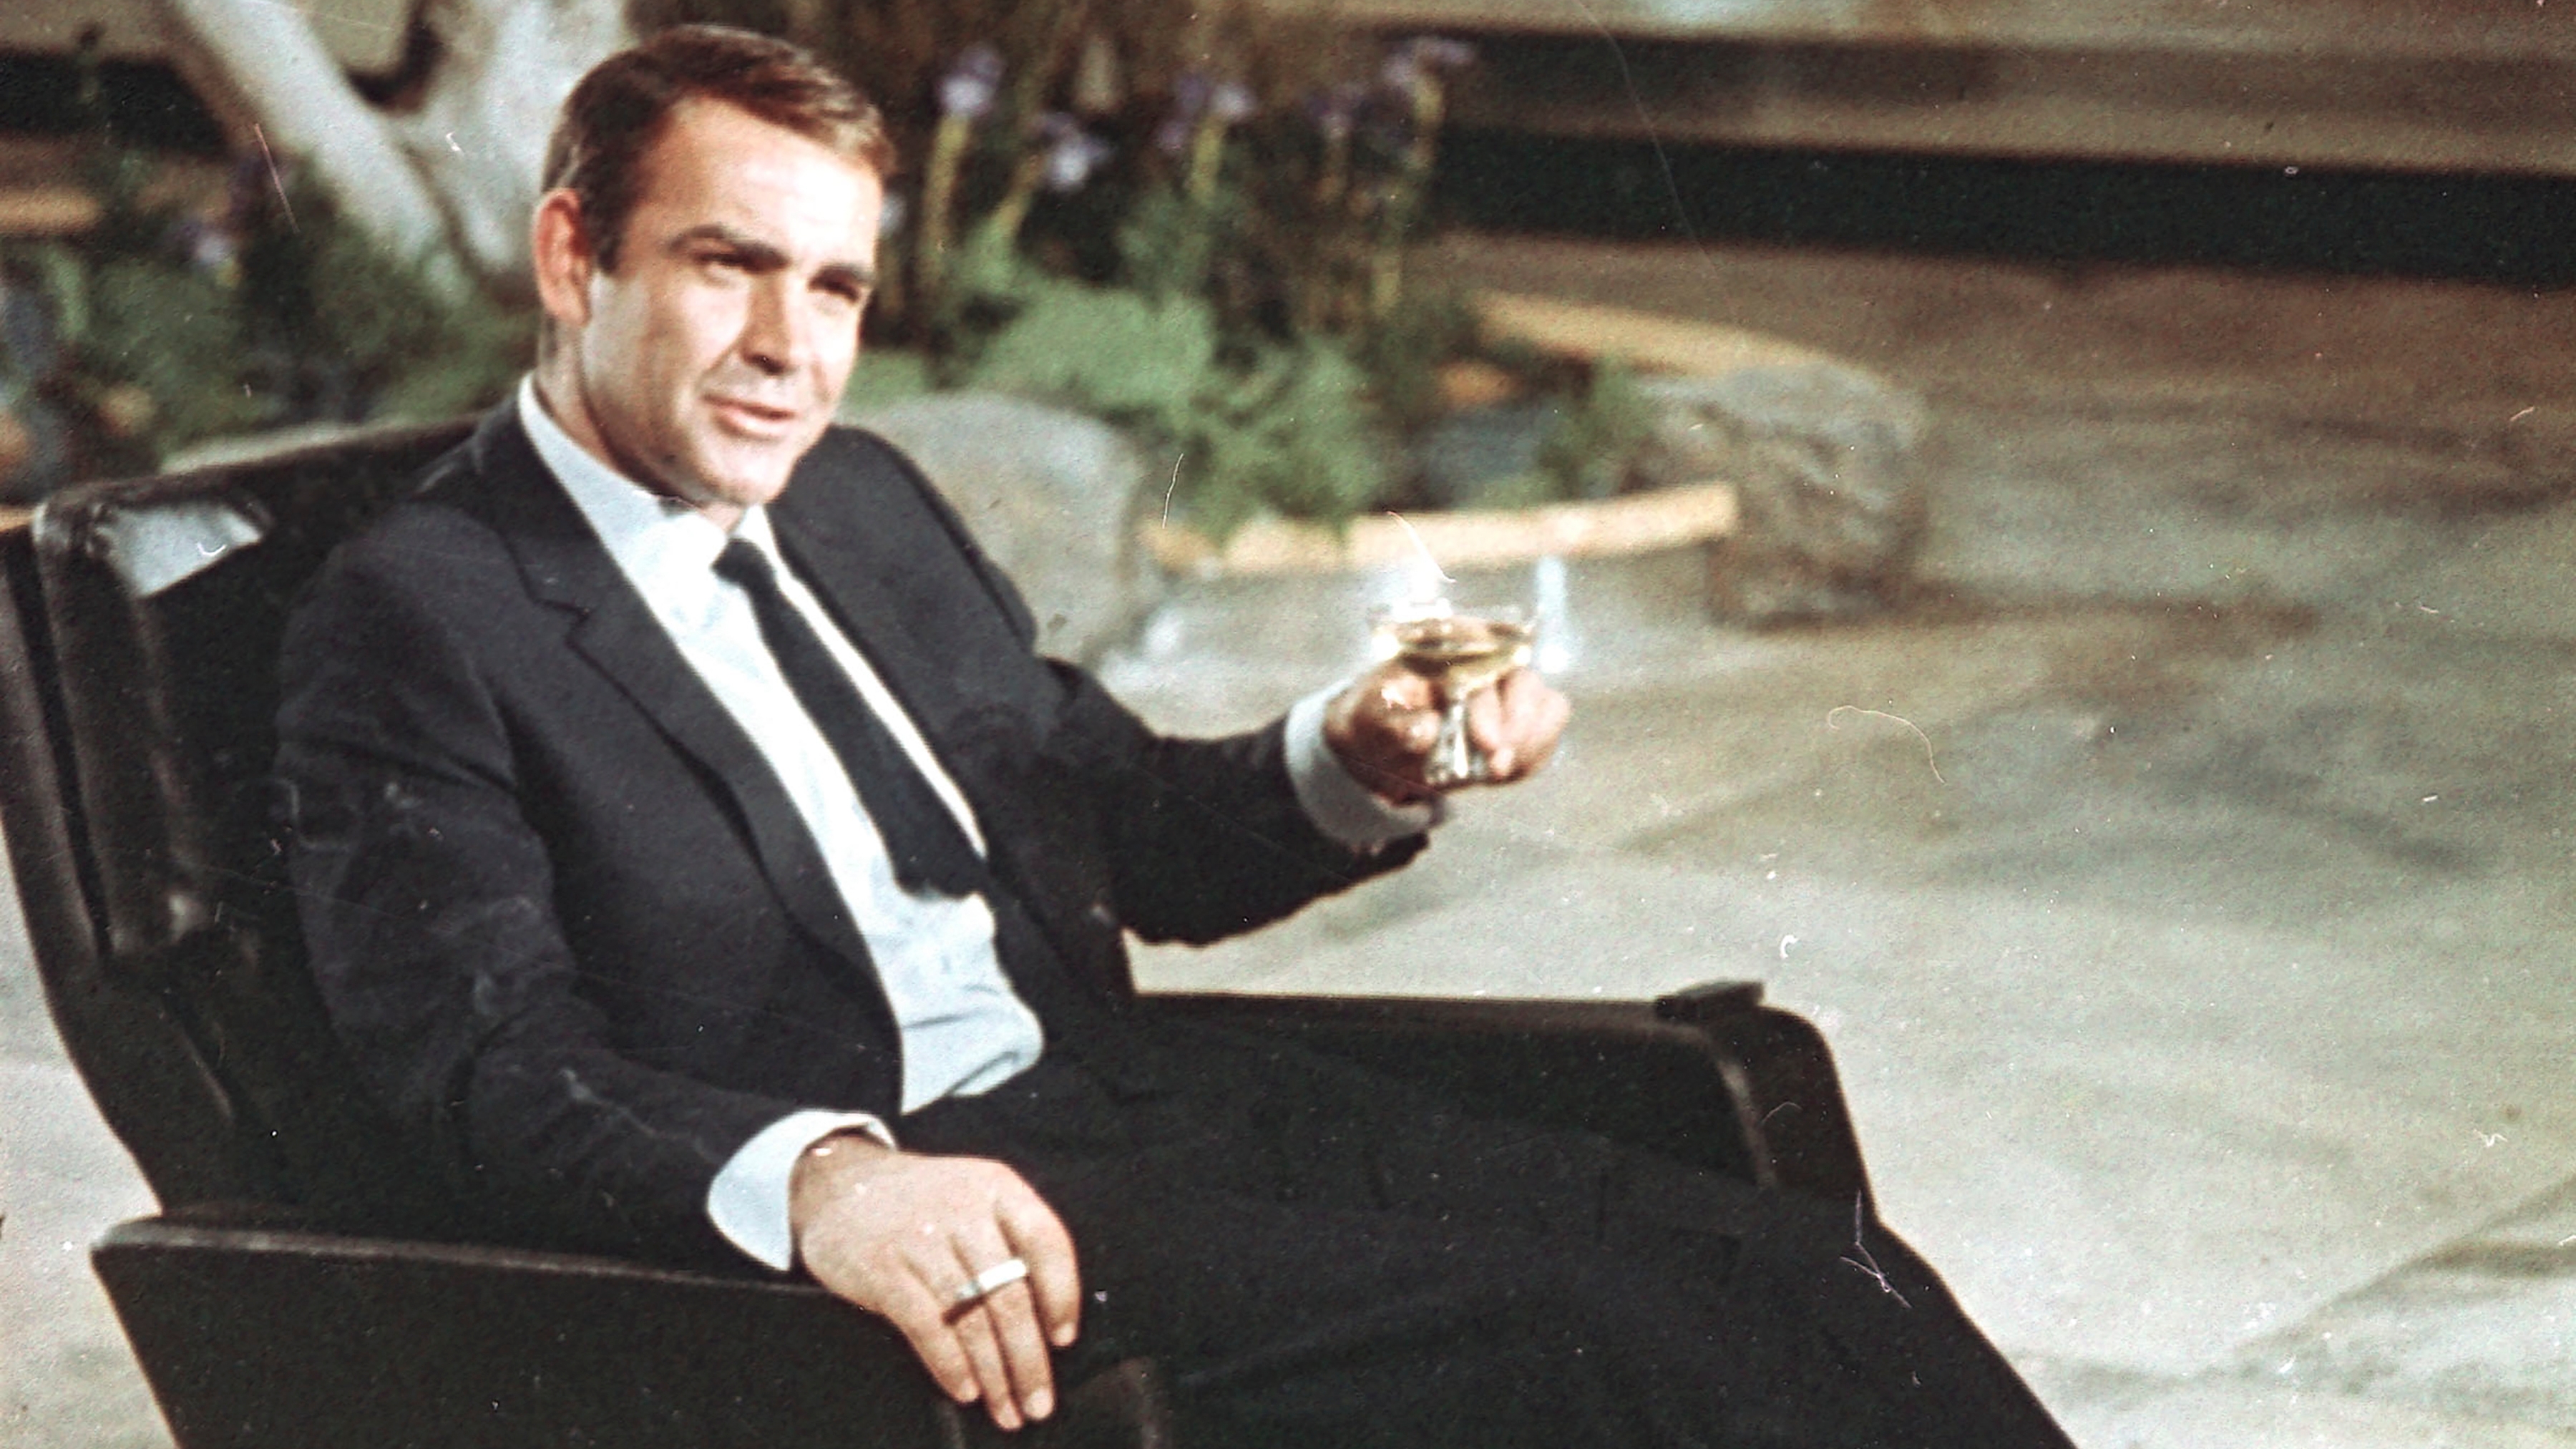 Sean Connery 007 Represented The Search For Real Manhood